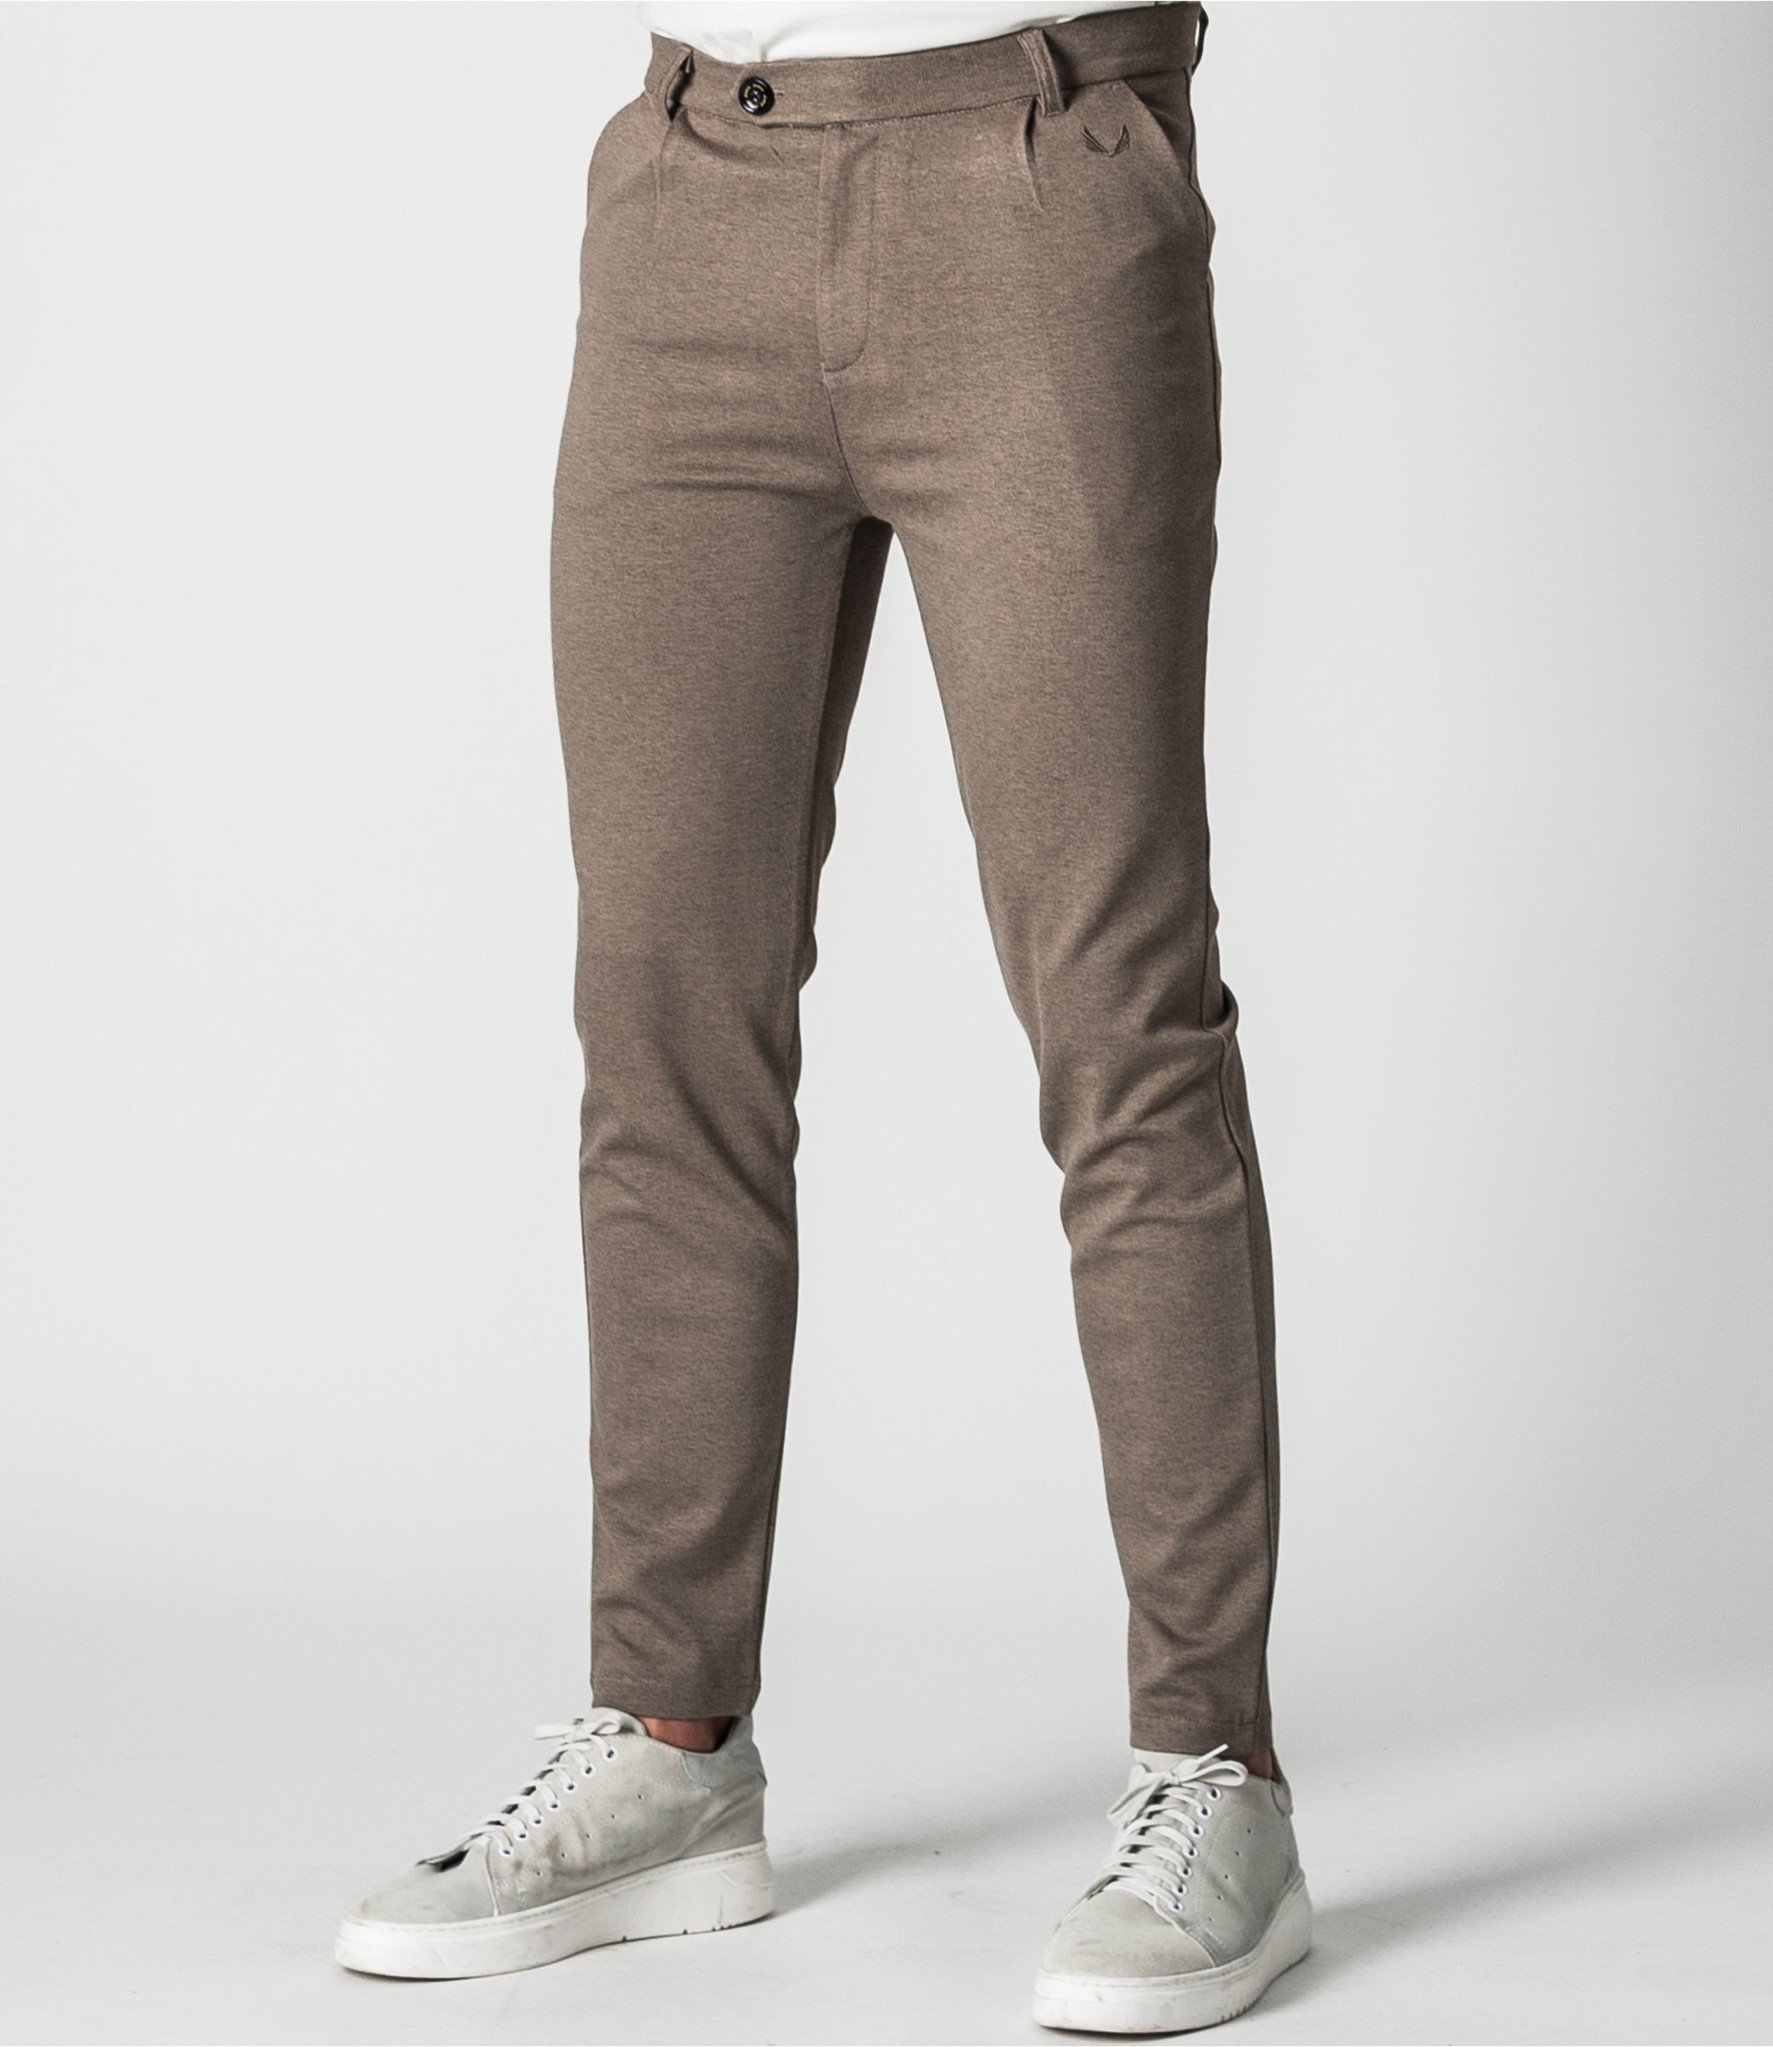 Mens Trousers  AMI PARIS Oversized Carrot Fit Chino Trousers Brown   Fusion Custom Mask